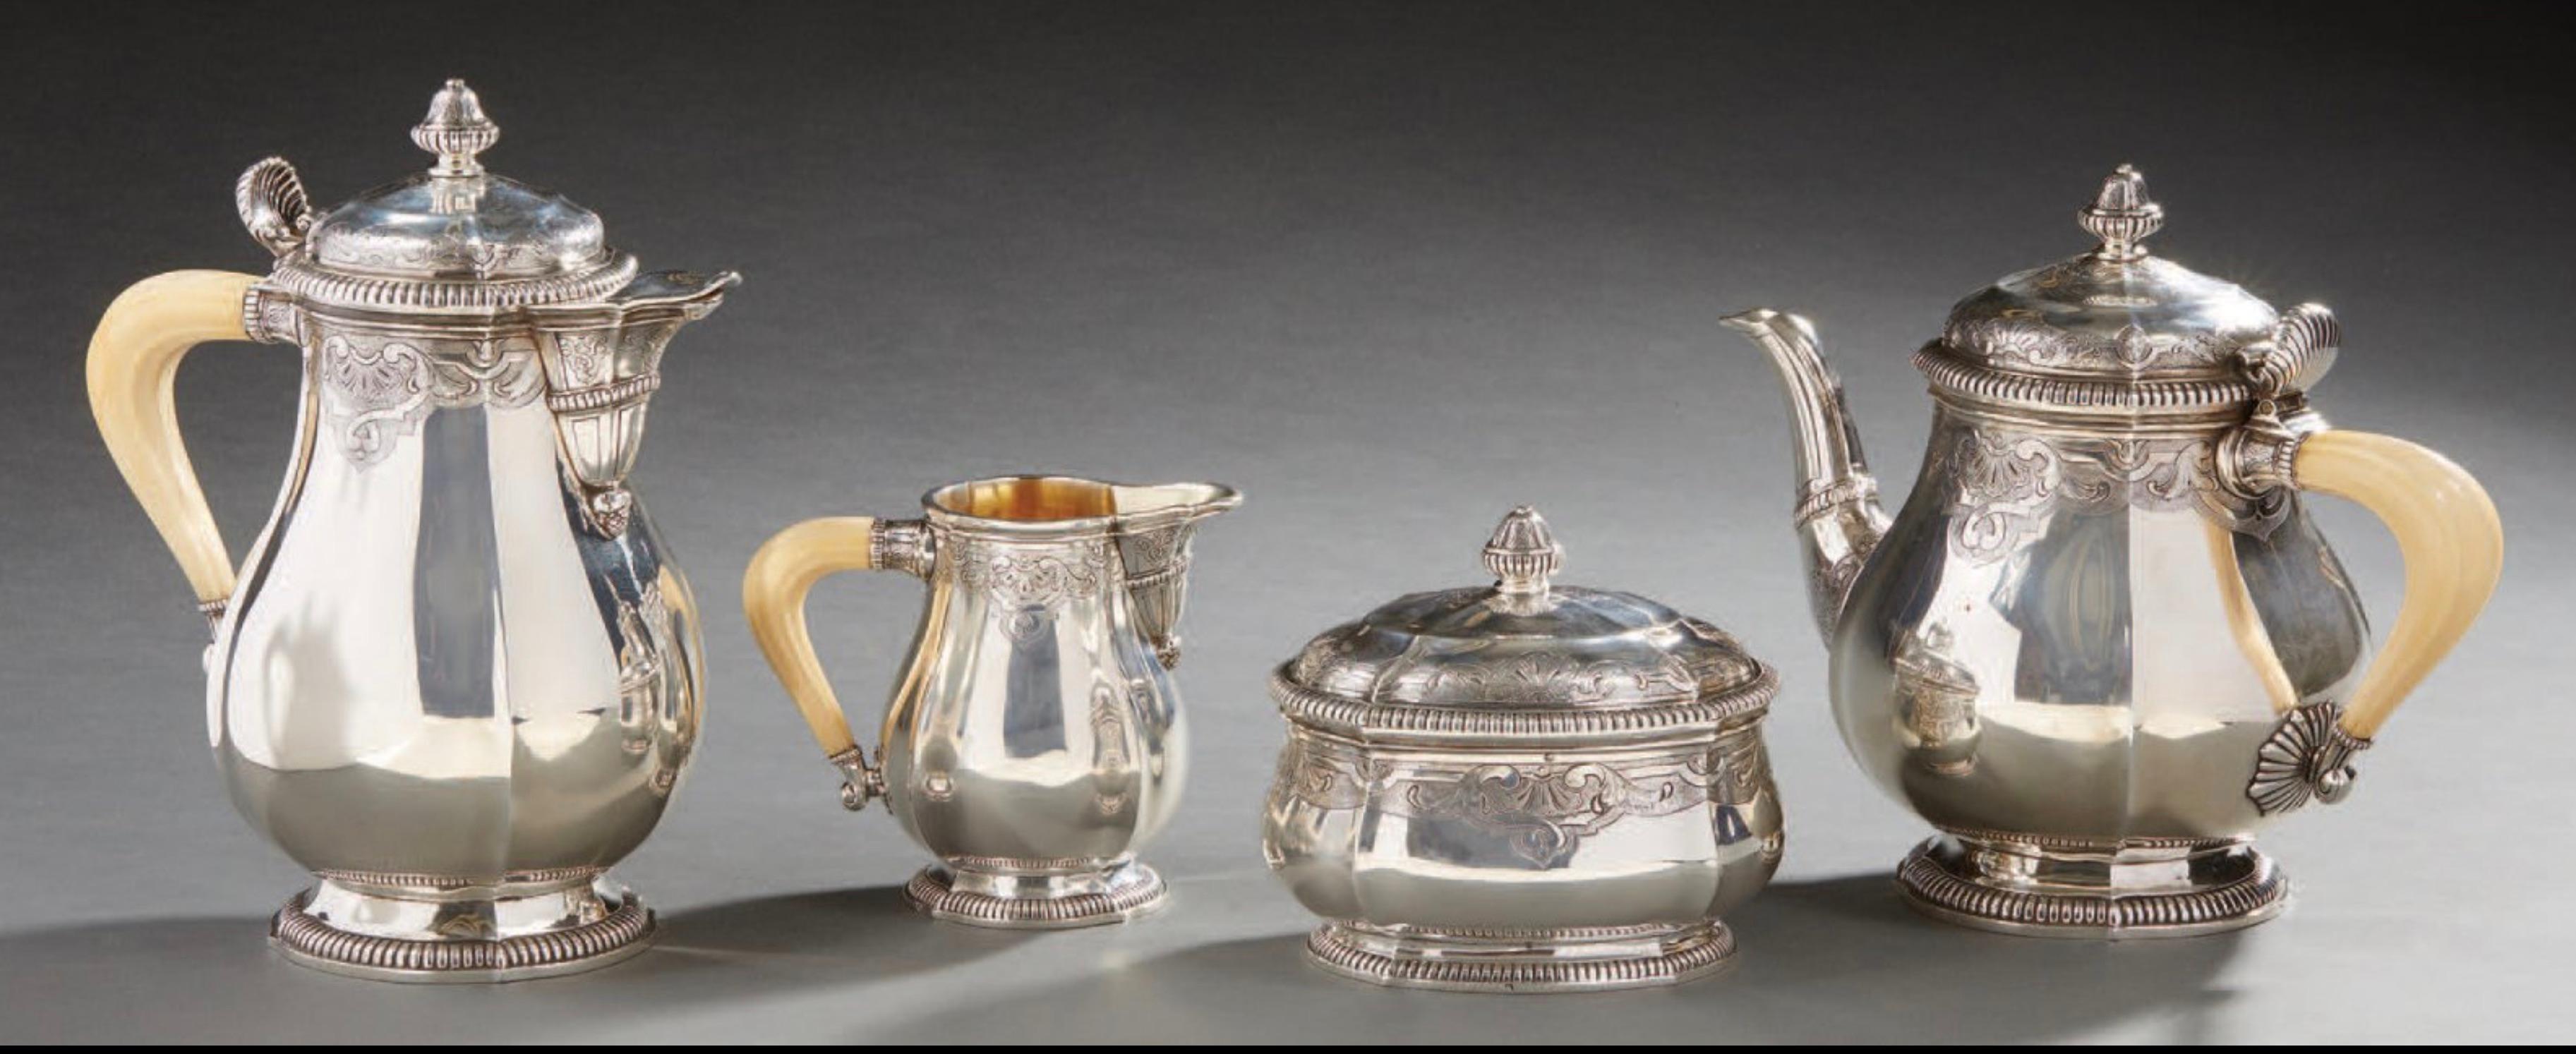 A magnificent, fine and impressive antique French 950 standard silver four piece tea and coffee set and coffee service with pattern with decoration. The set includes a coffee pot, a teapot, a covered sugar pot and a creamer.
Ivory handle for each